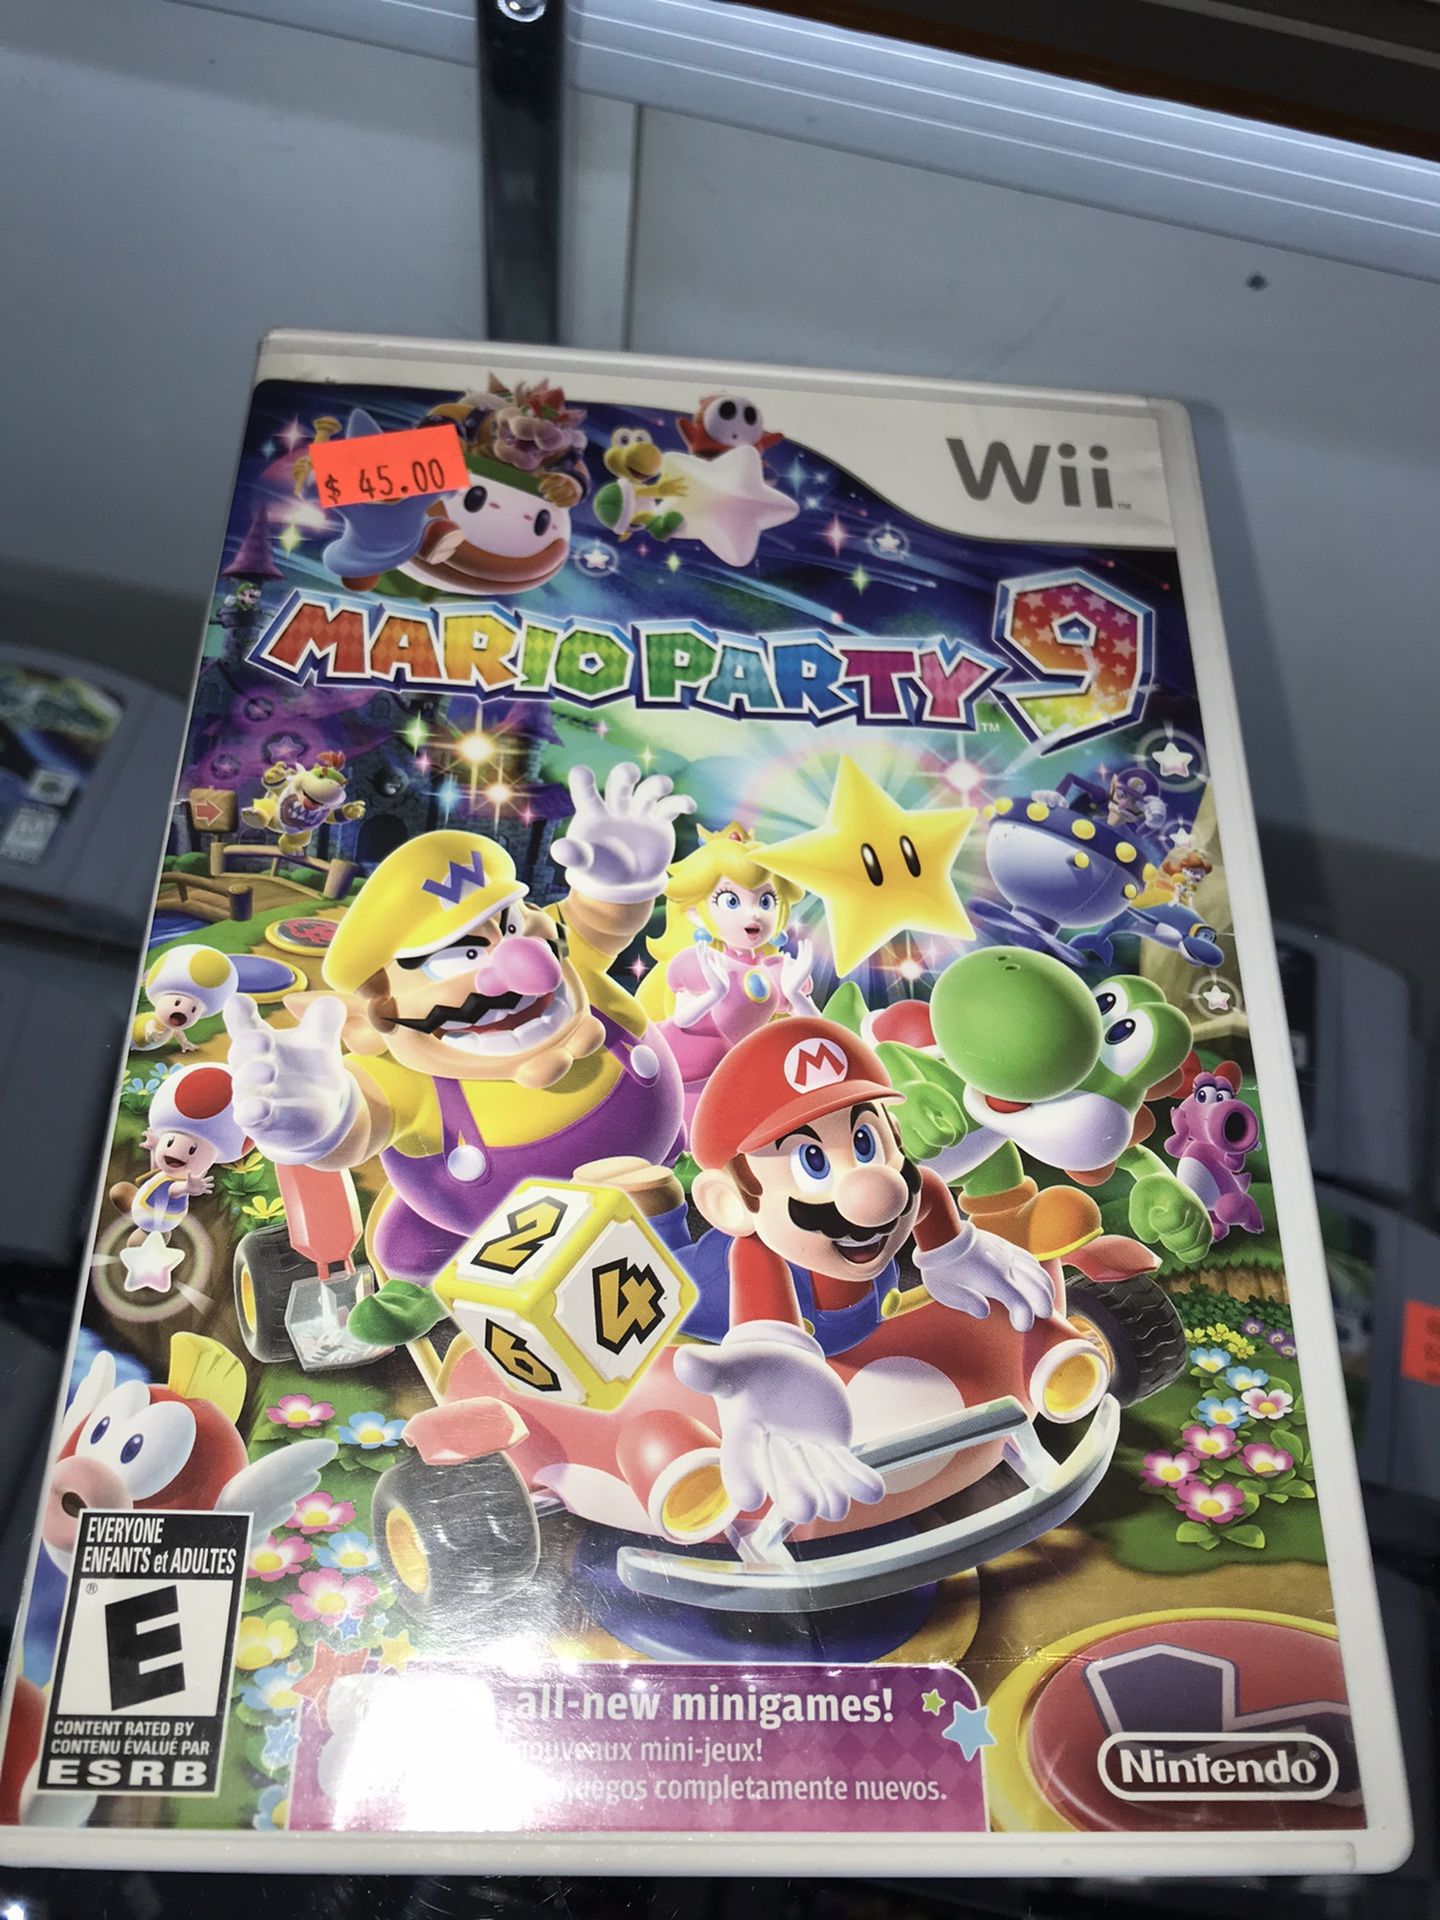 Mario party 9 video game in stock ( plaza garland)